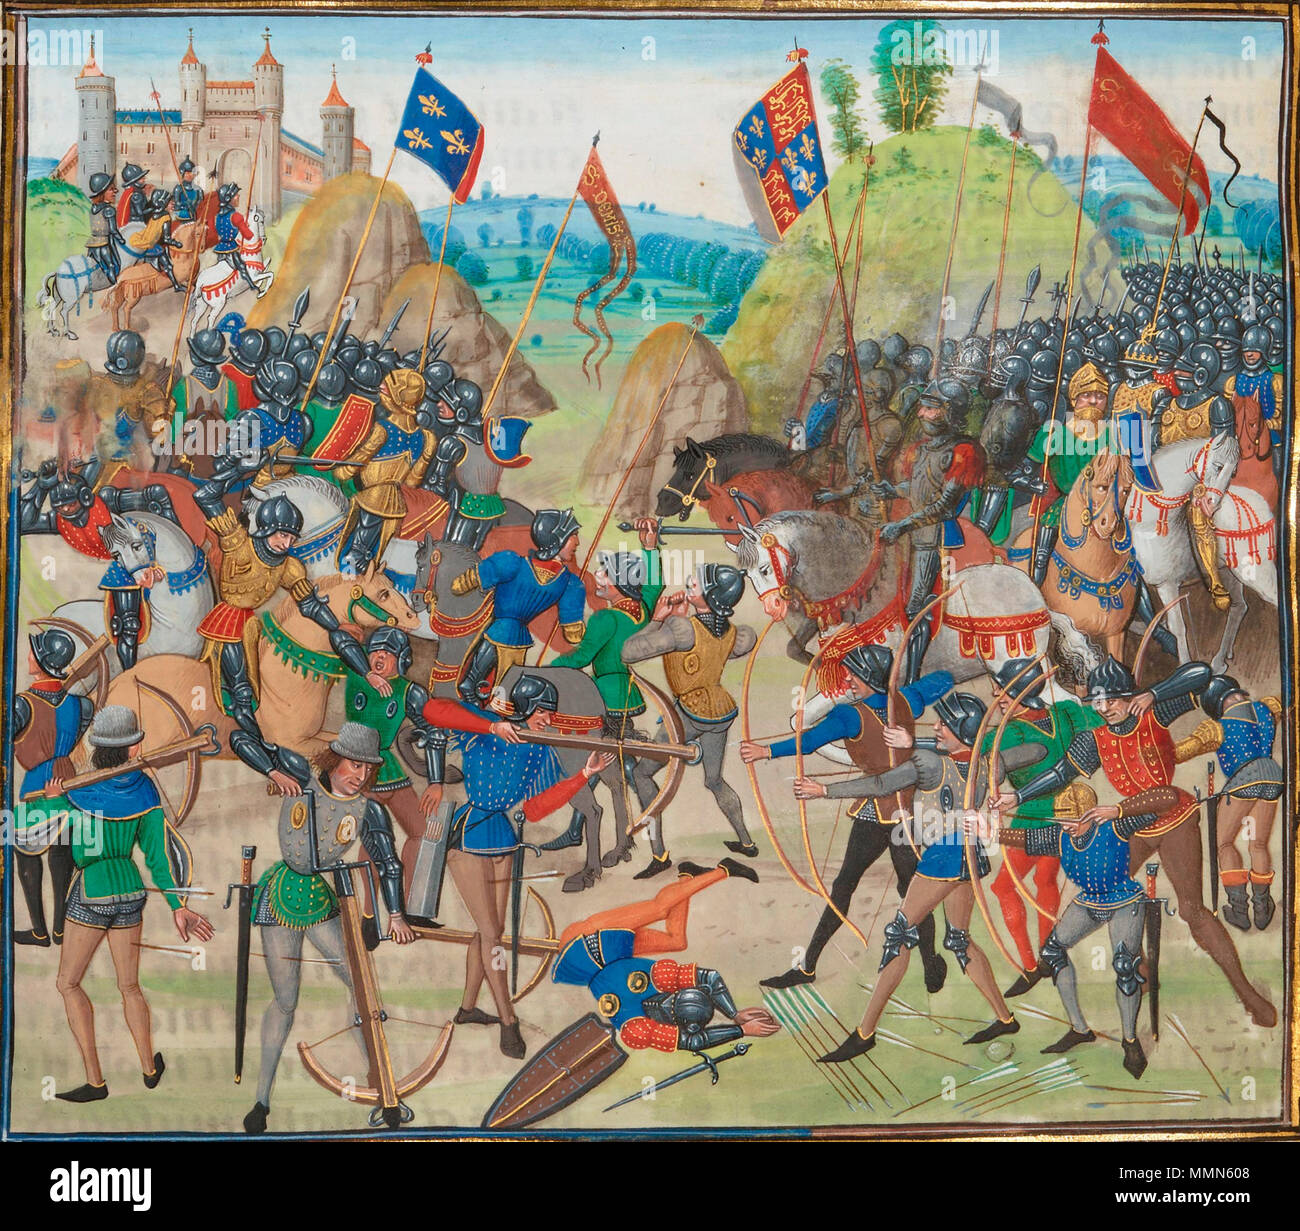 . From a illuminated manuscript of Jean Froissart's Chronicles  Battle of Crécy between the English and French in the Hundred Years' War.. 15th century. Battle of crecy froissart Stock Photo